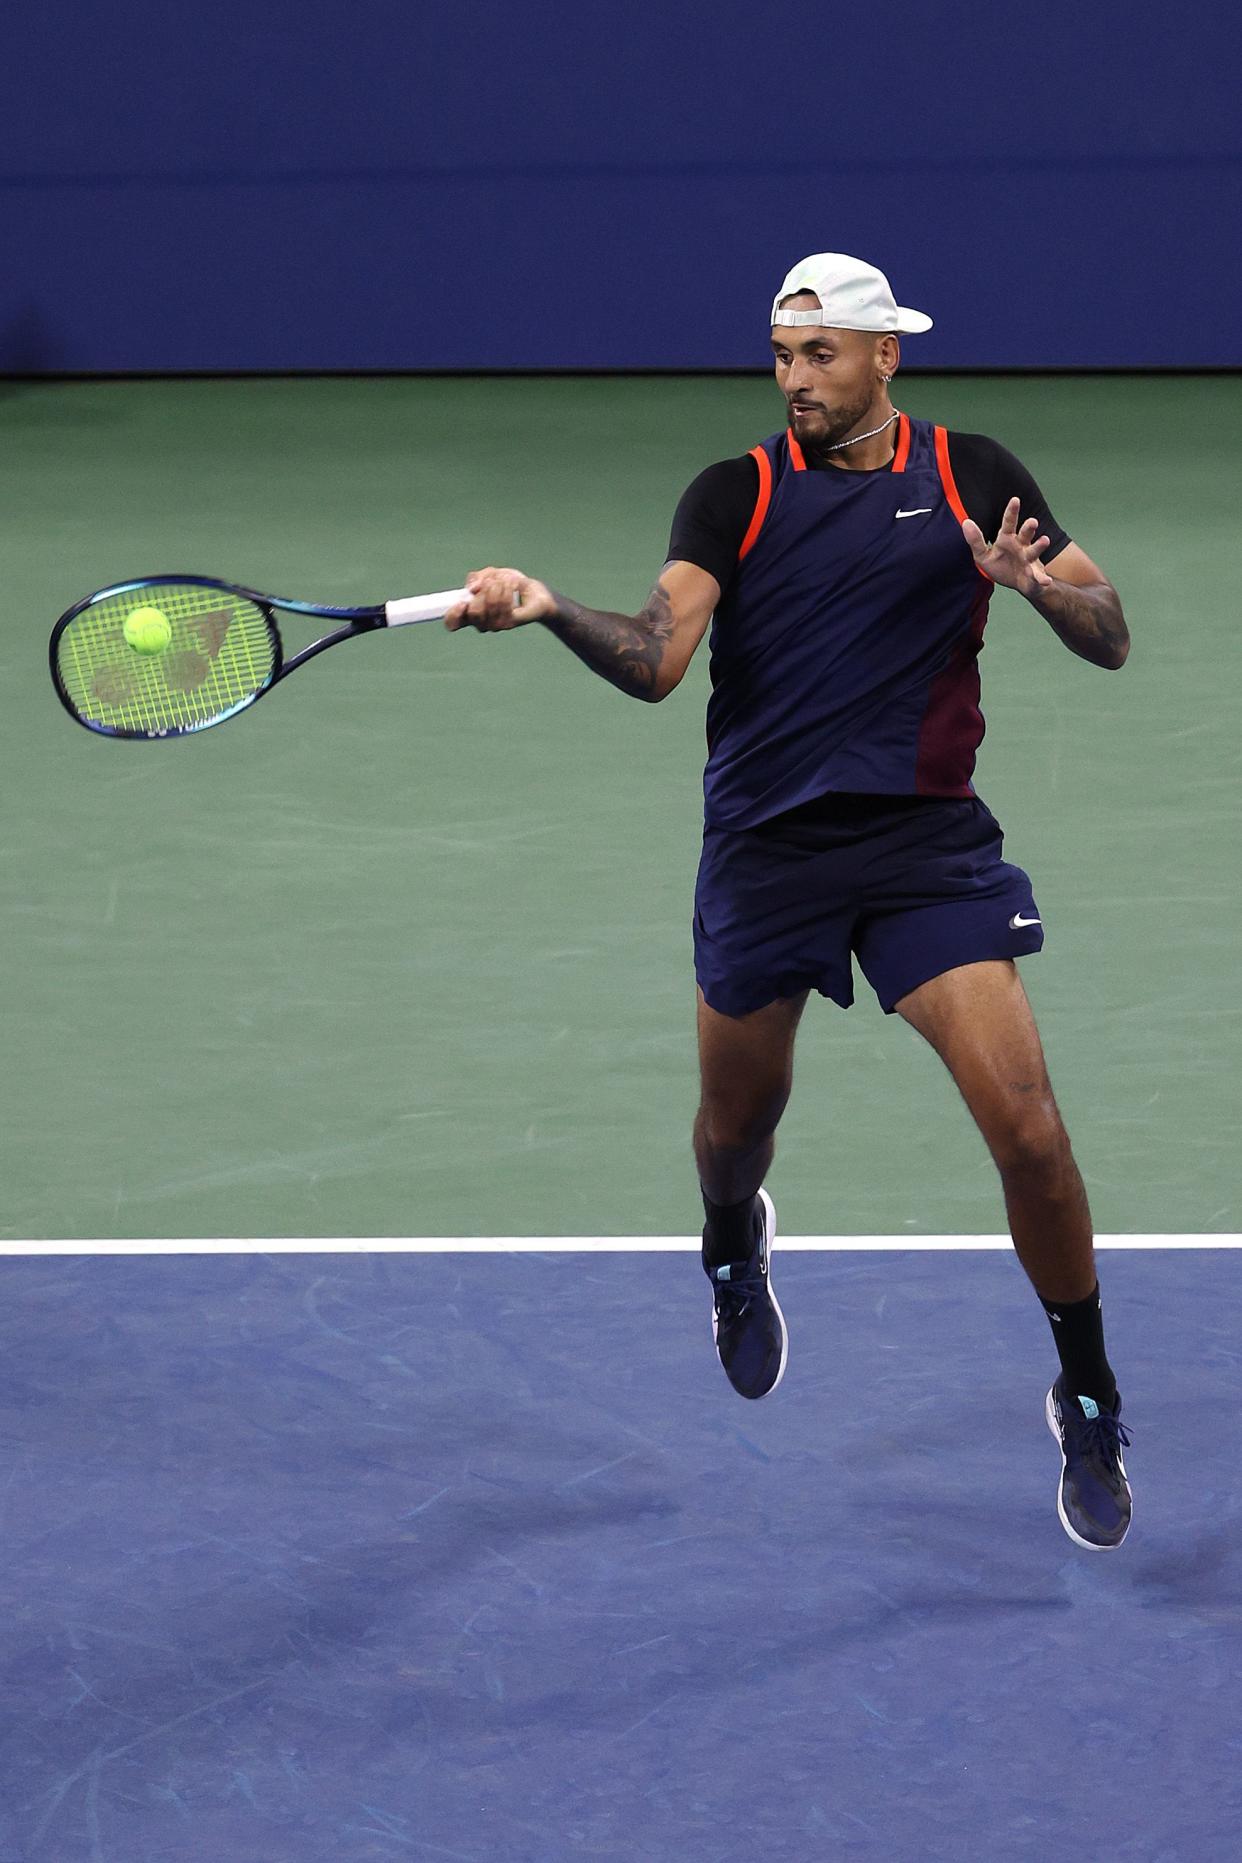 Nick Kyrgios of Australia plays a forehand against J.J. Wolf of the United States during their Men's Singles Third Round match on Day 5 of the 2022 U.S. Open at USTA Billie Jean King National Tennis Center on Sept. 02, 2022, in Flushing, Queens.